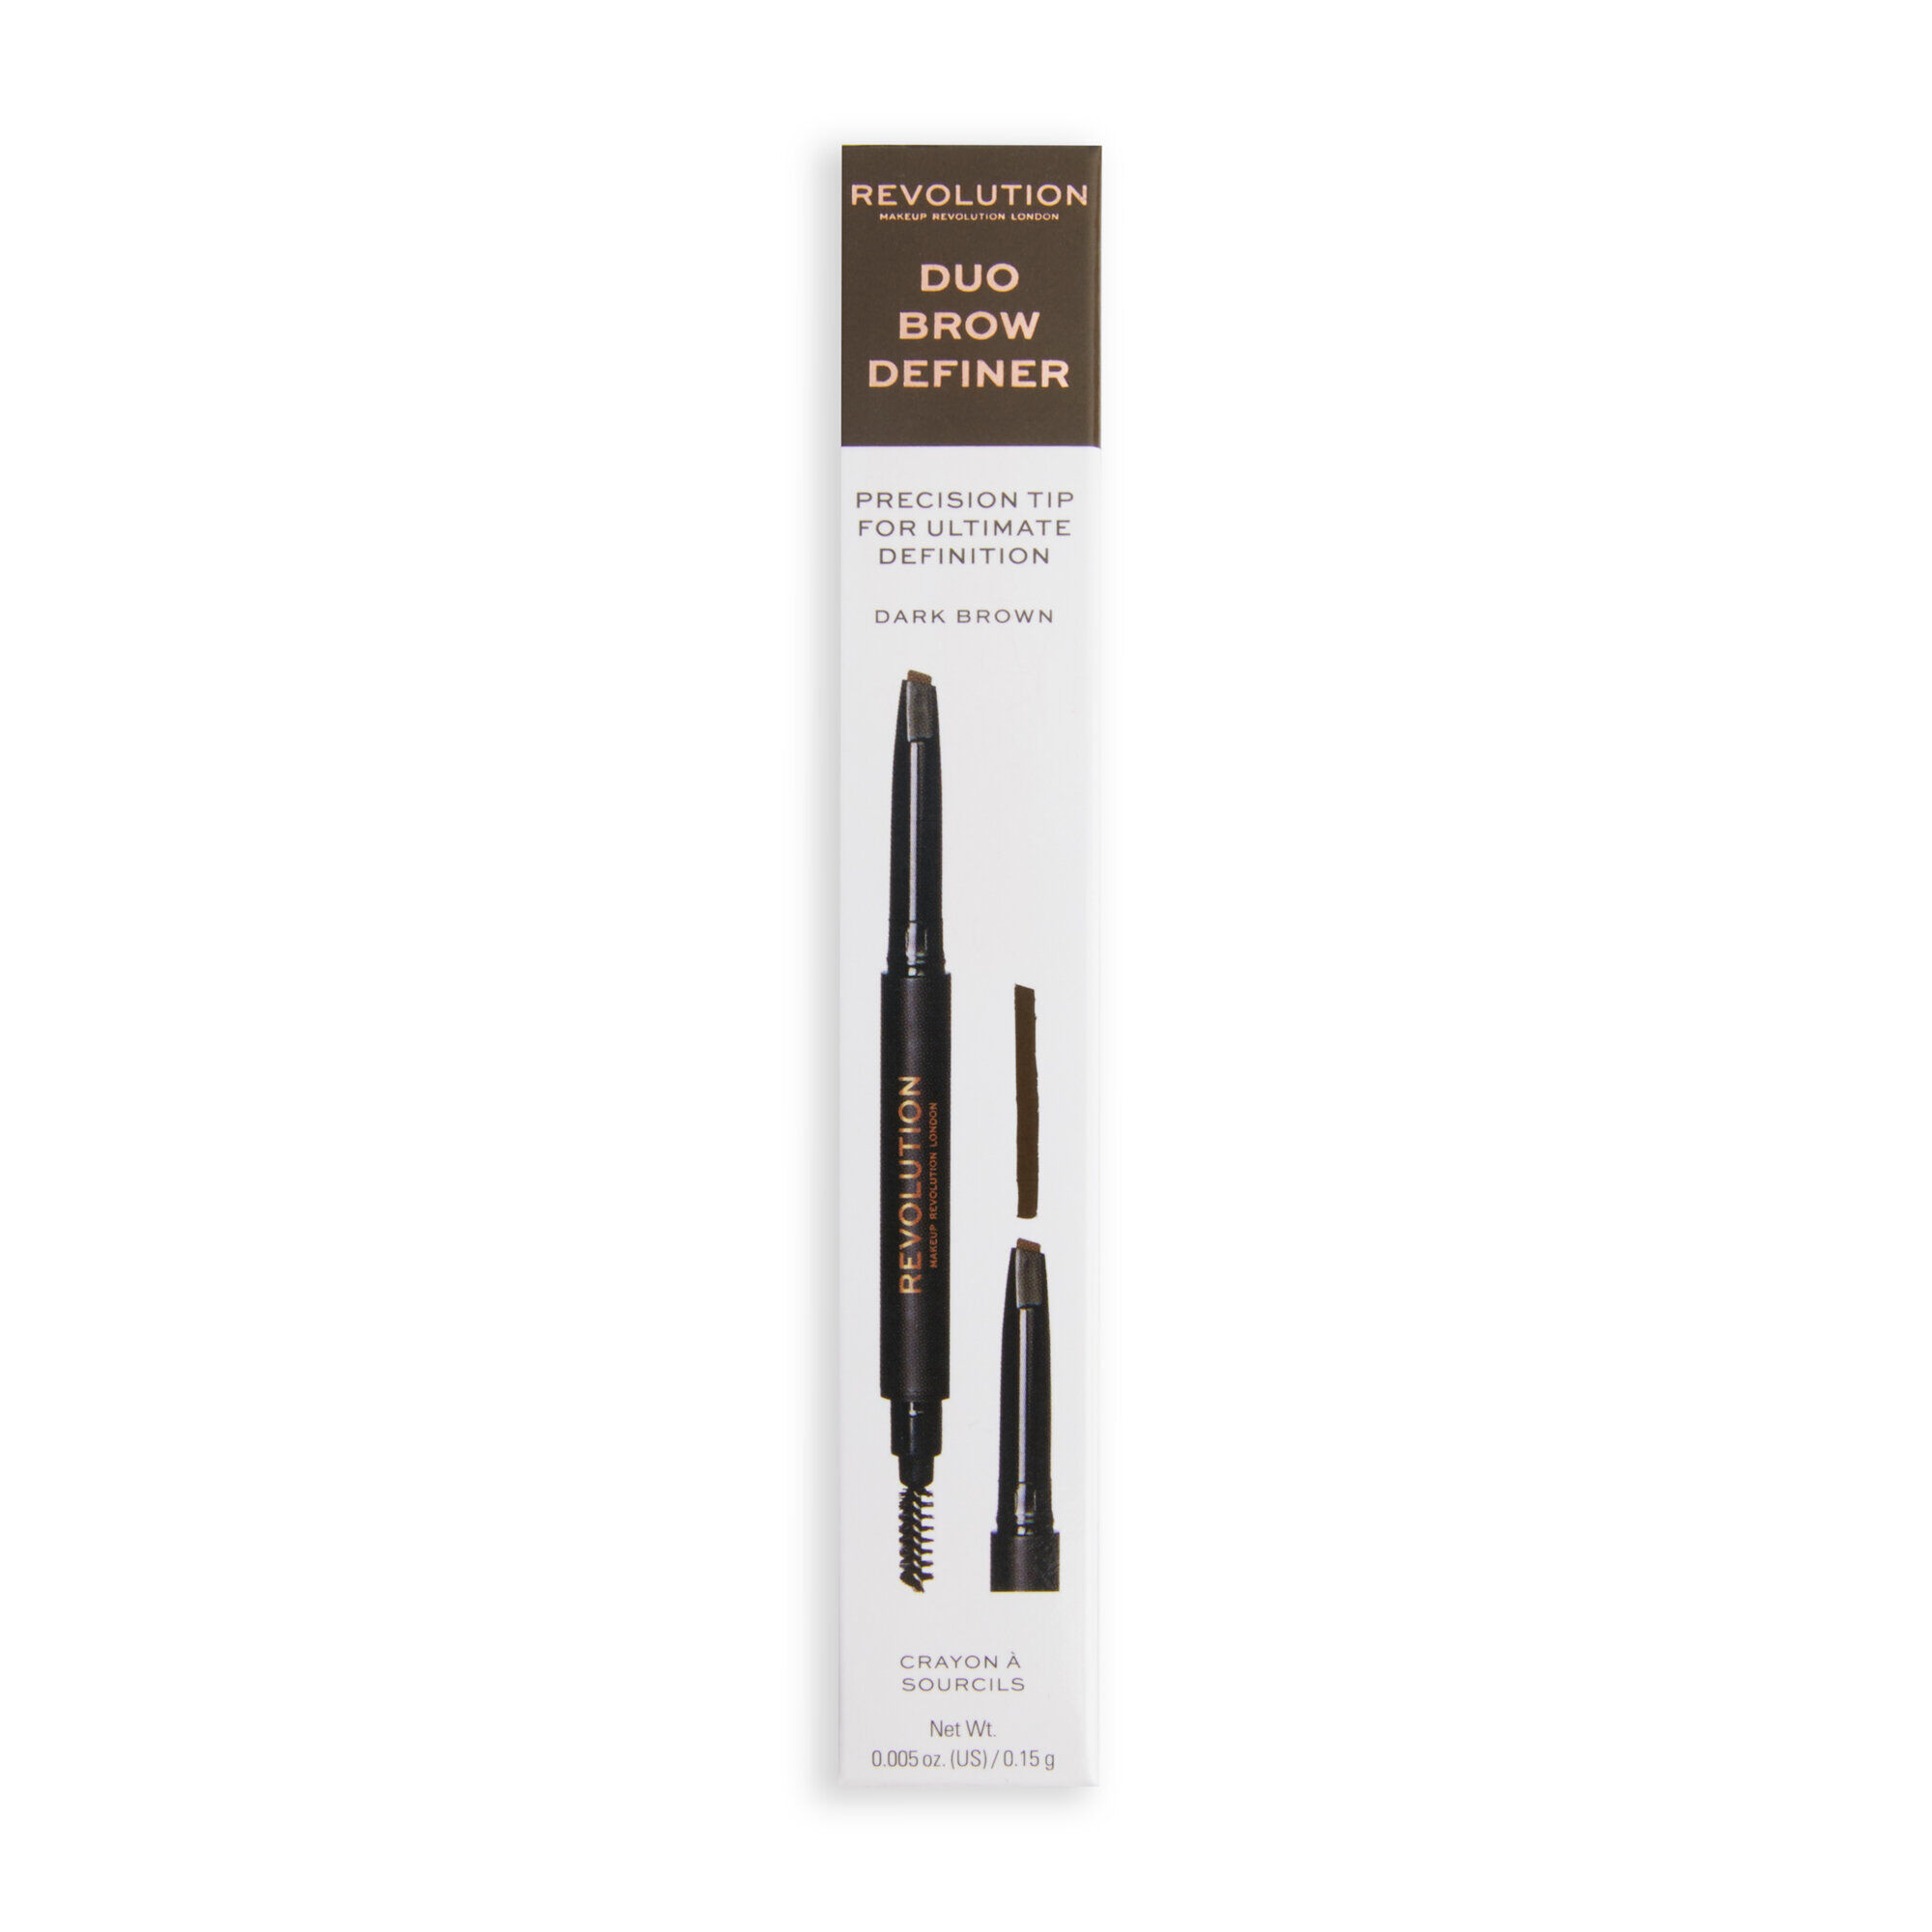 Duo Brow Pencil Dark Brown Revolution Beauty Official Site